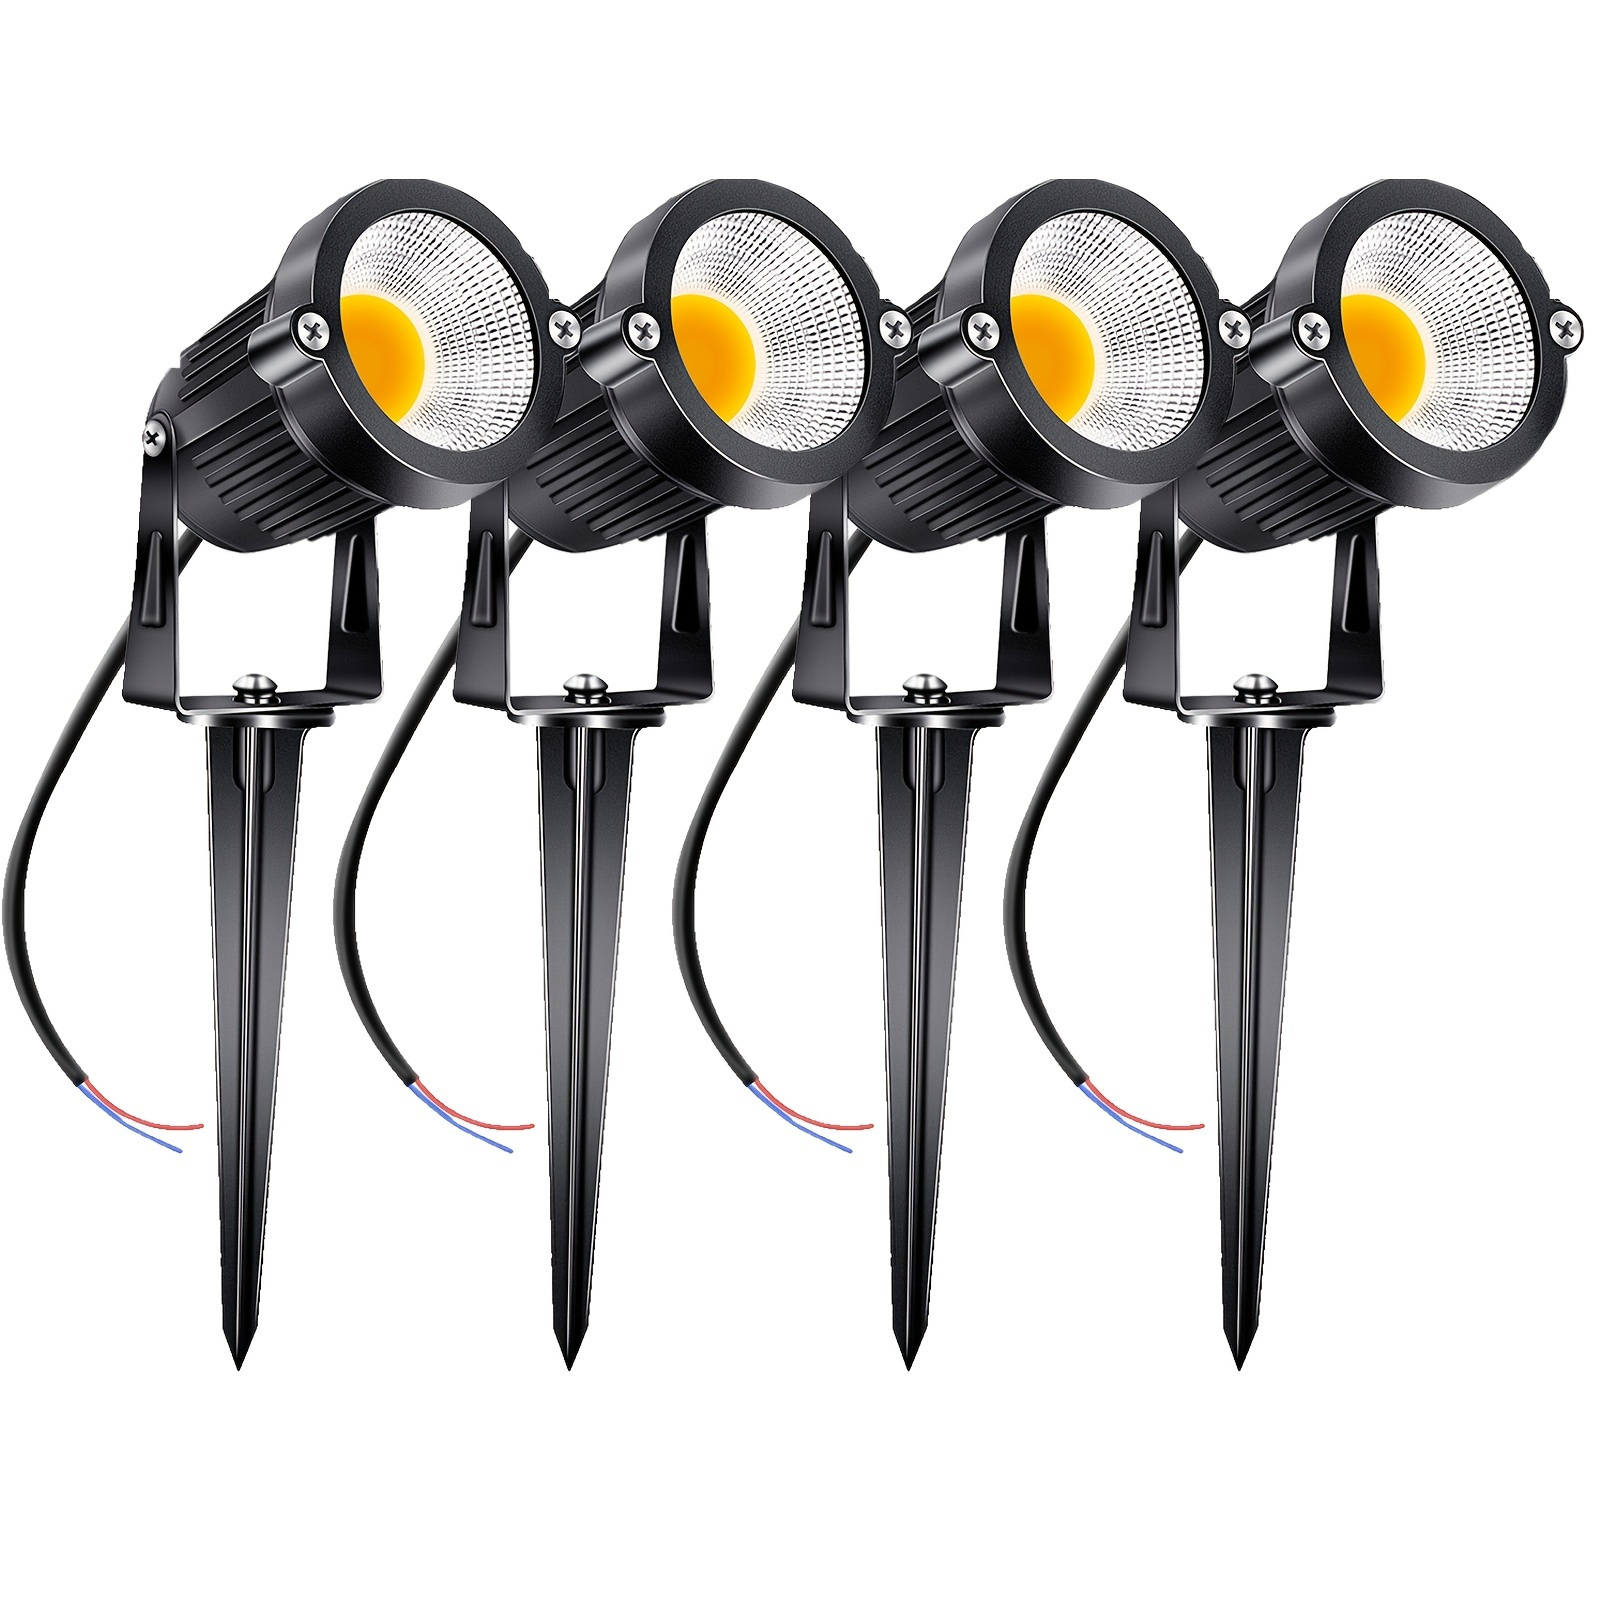 LED Christmas lights 12volts AC / DC Specifically for Landscape lighting  systems